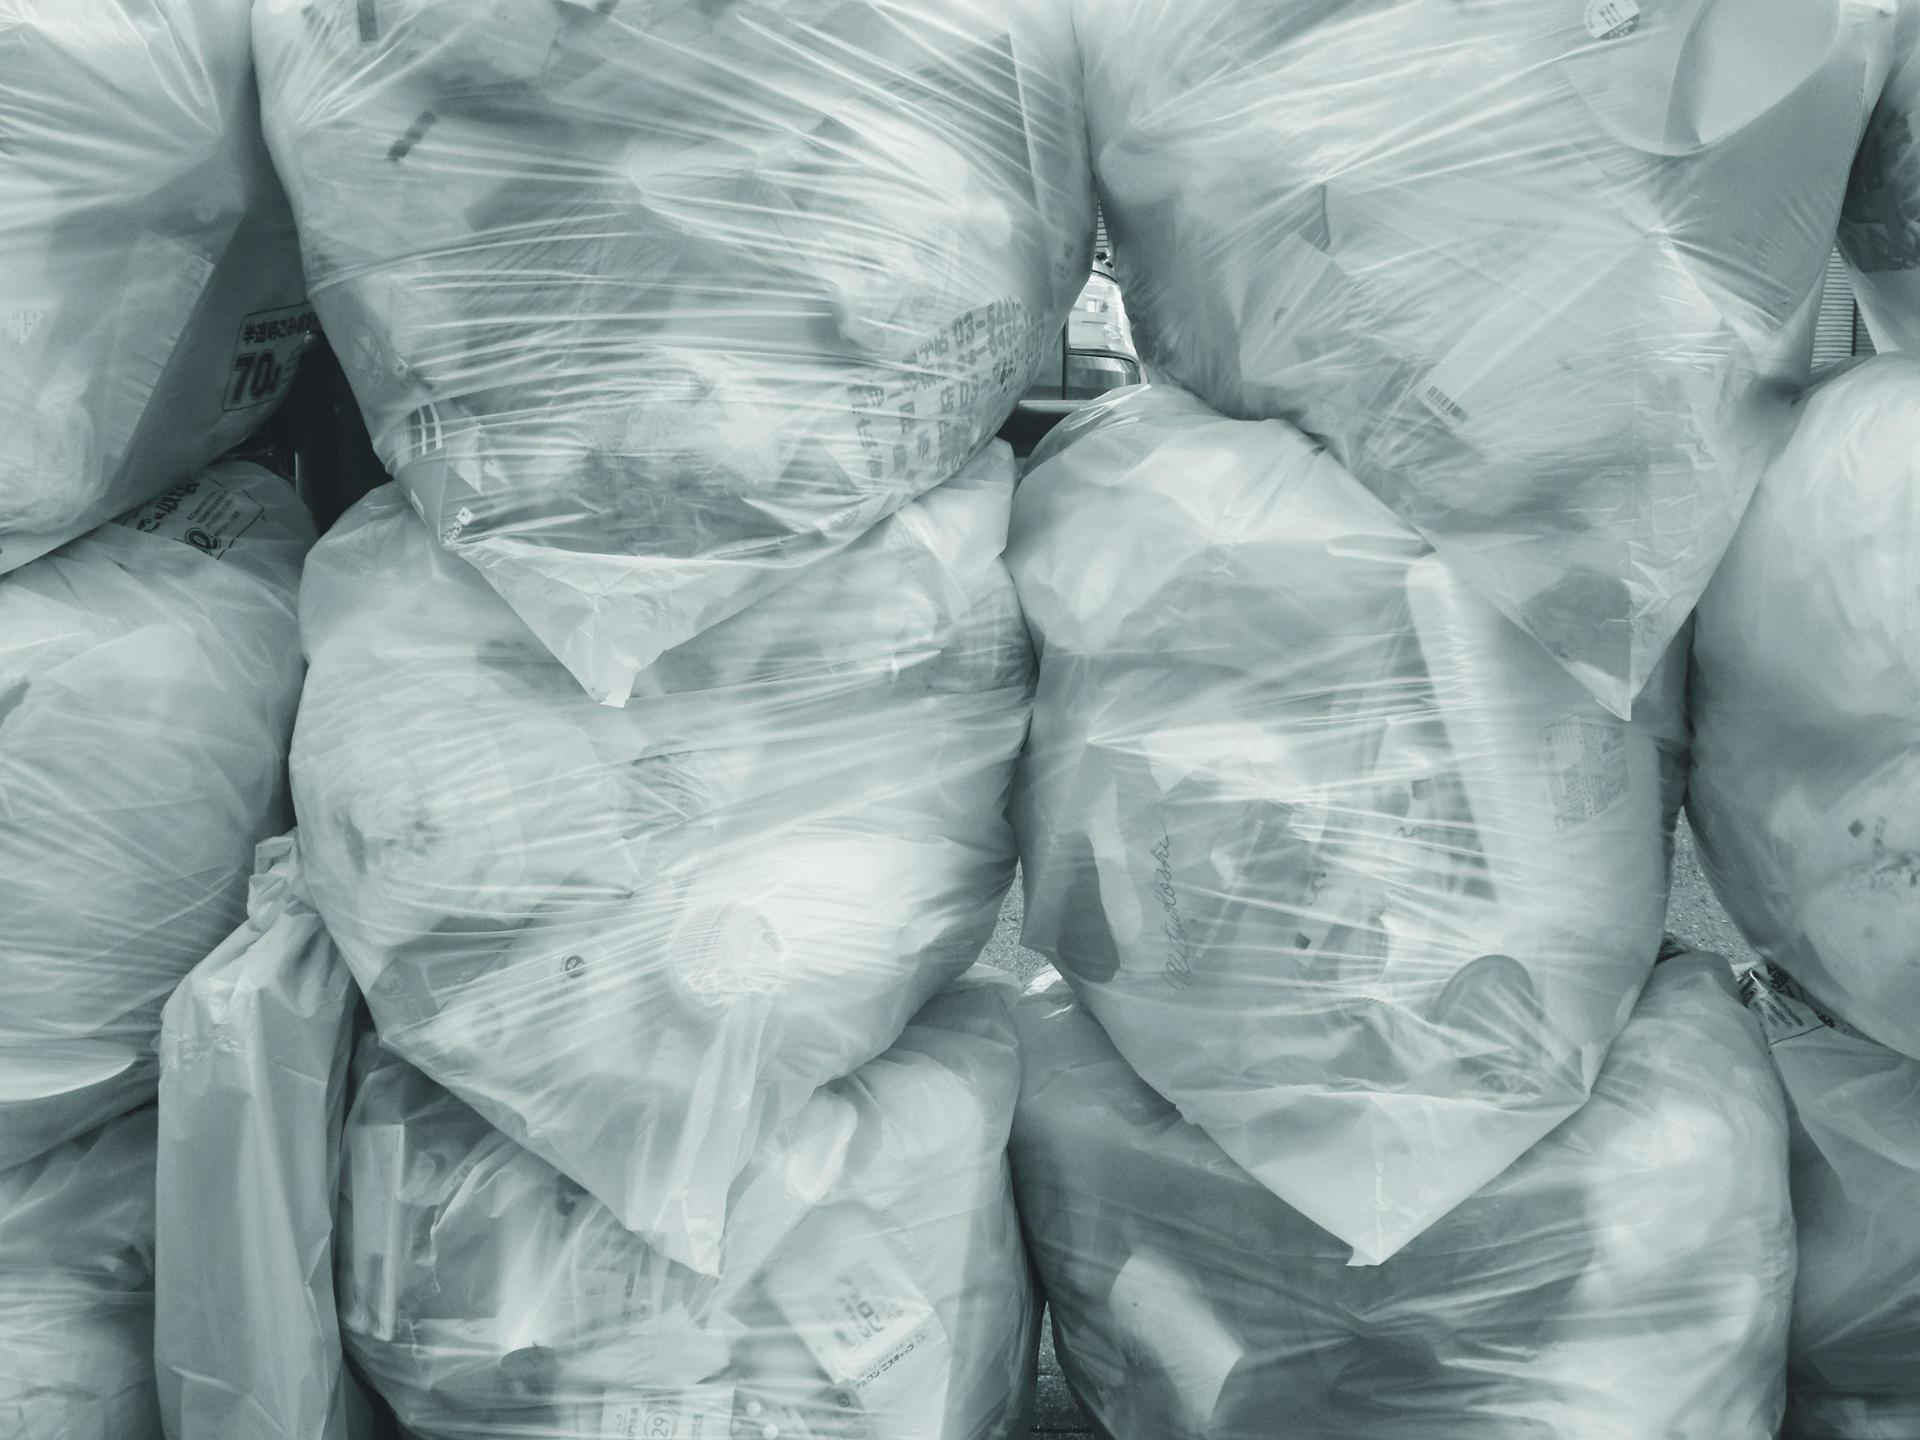 What Is The Process In Waste Removal